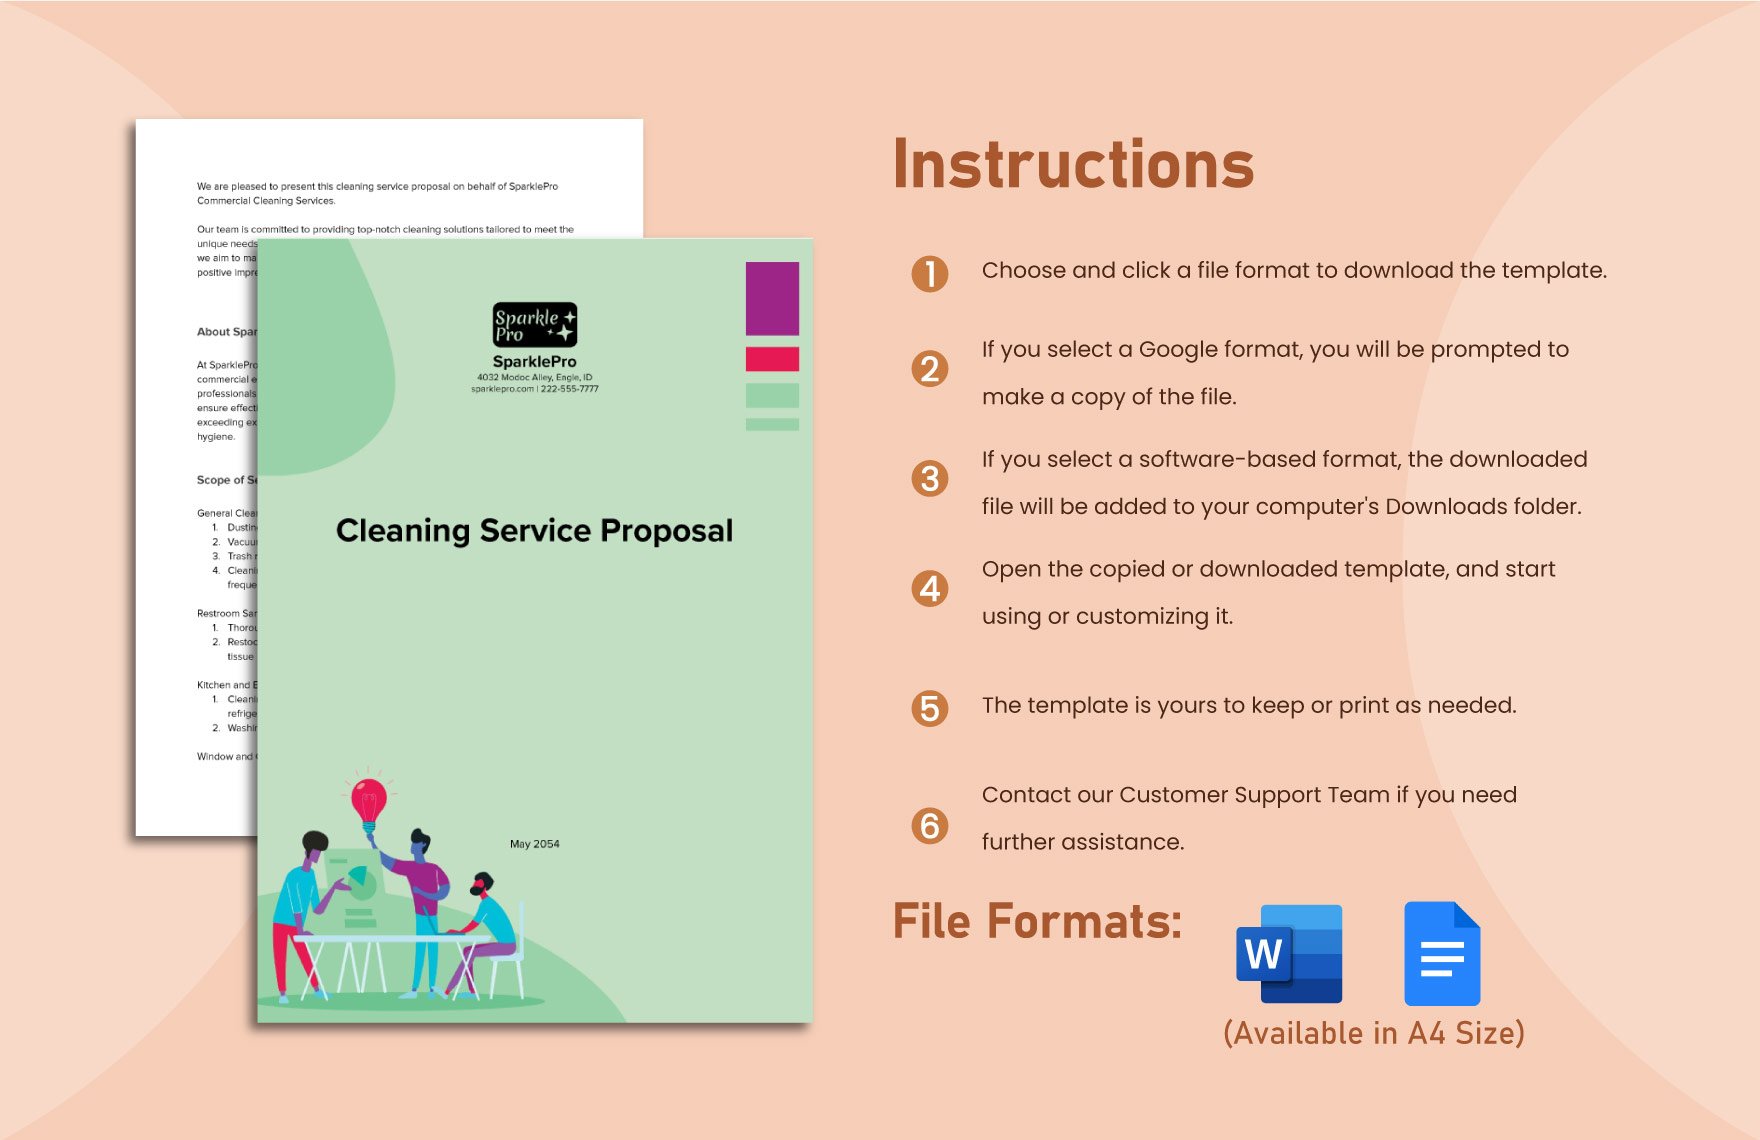 Commercial Cleaning Proposal Template